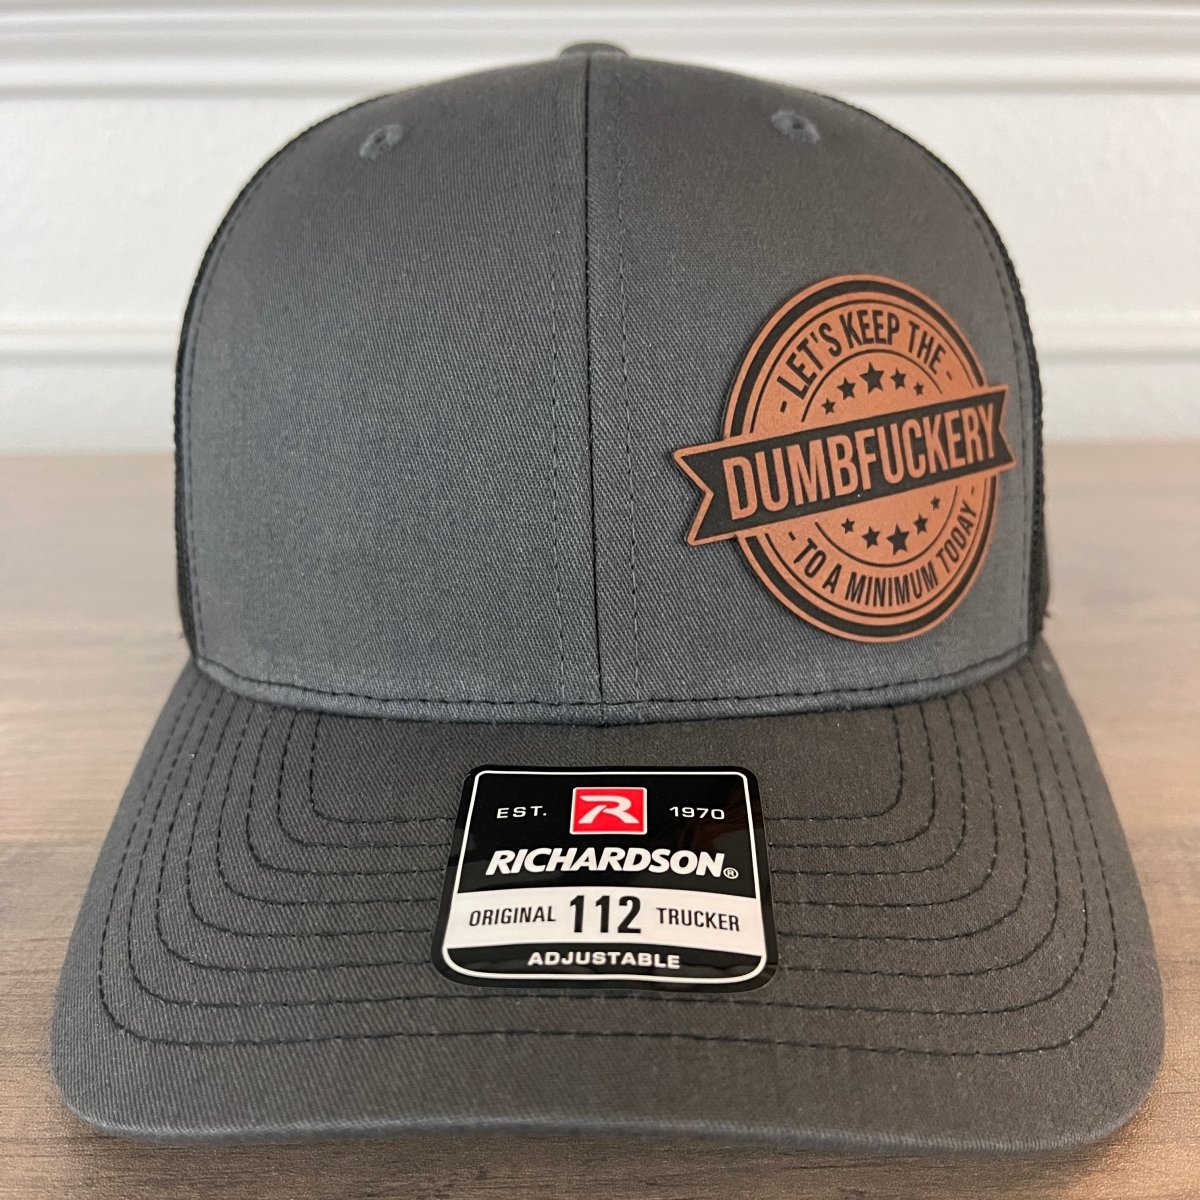 Let's Keep The Dumbfckery To A Minimum Today Funny Leather Patch Hat Charcoal/Black Patch Hat - VividEditions